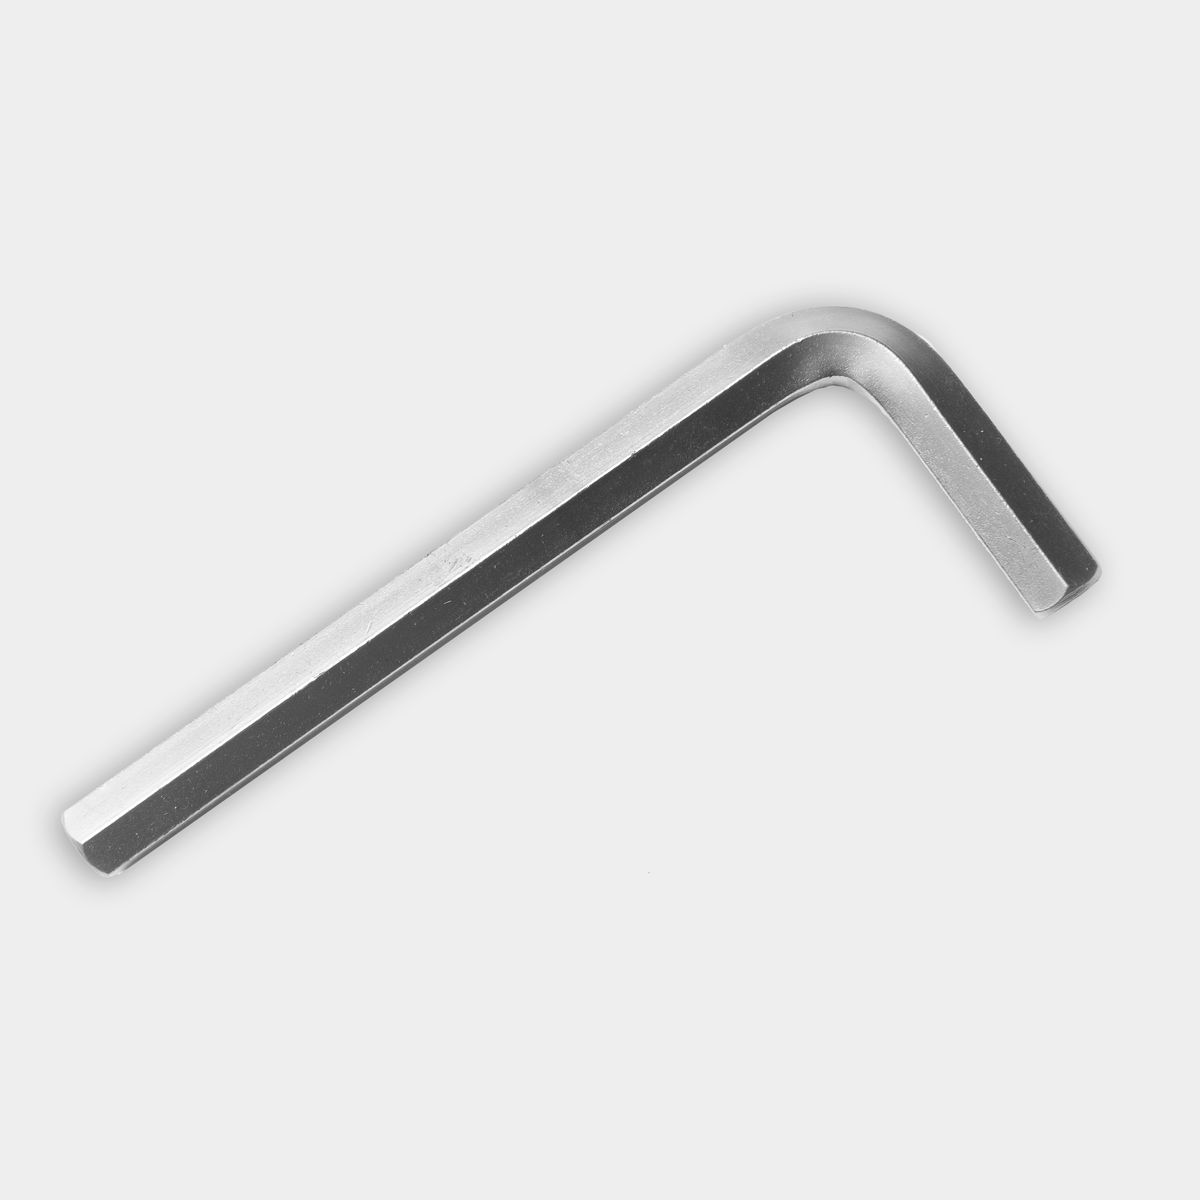 Allen wrench on a gray background